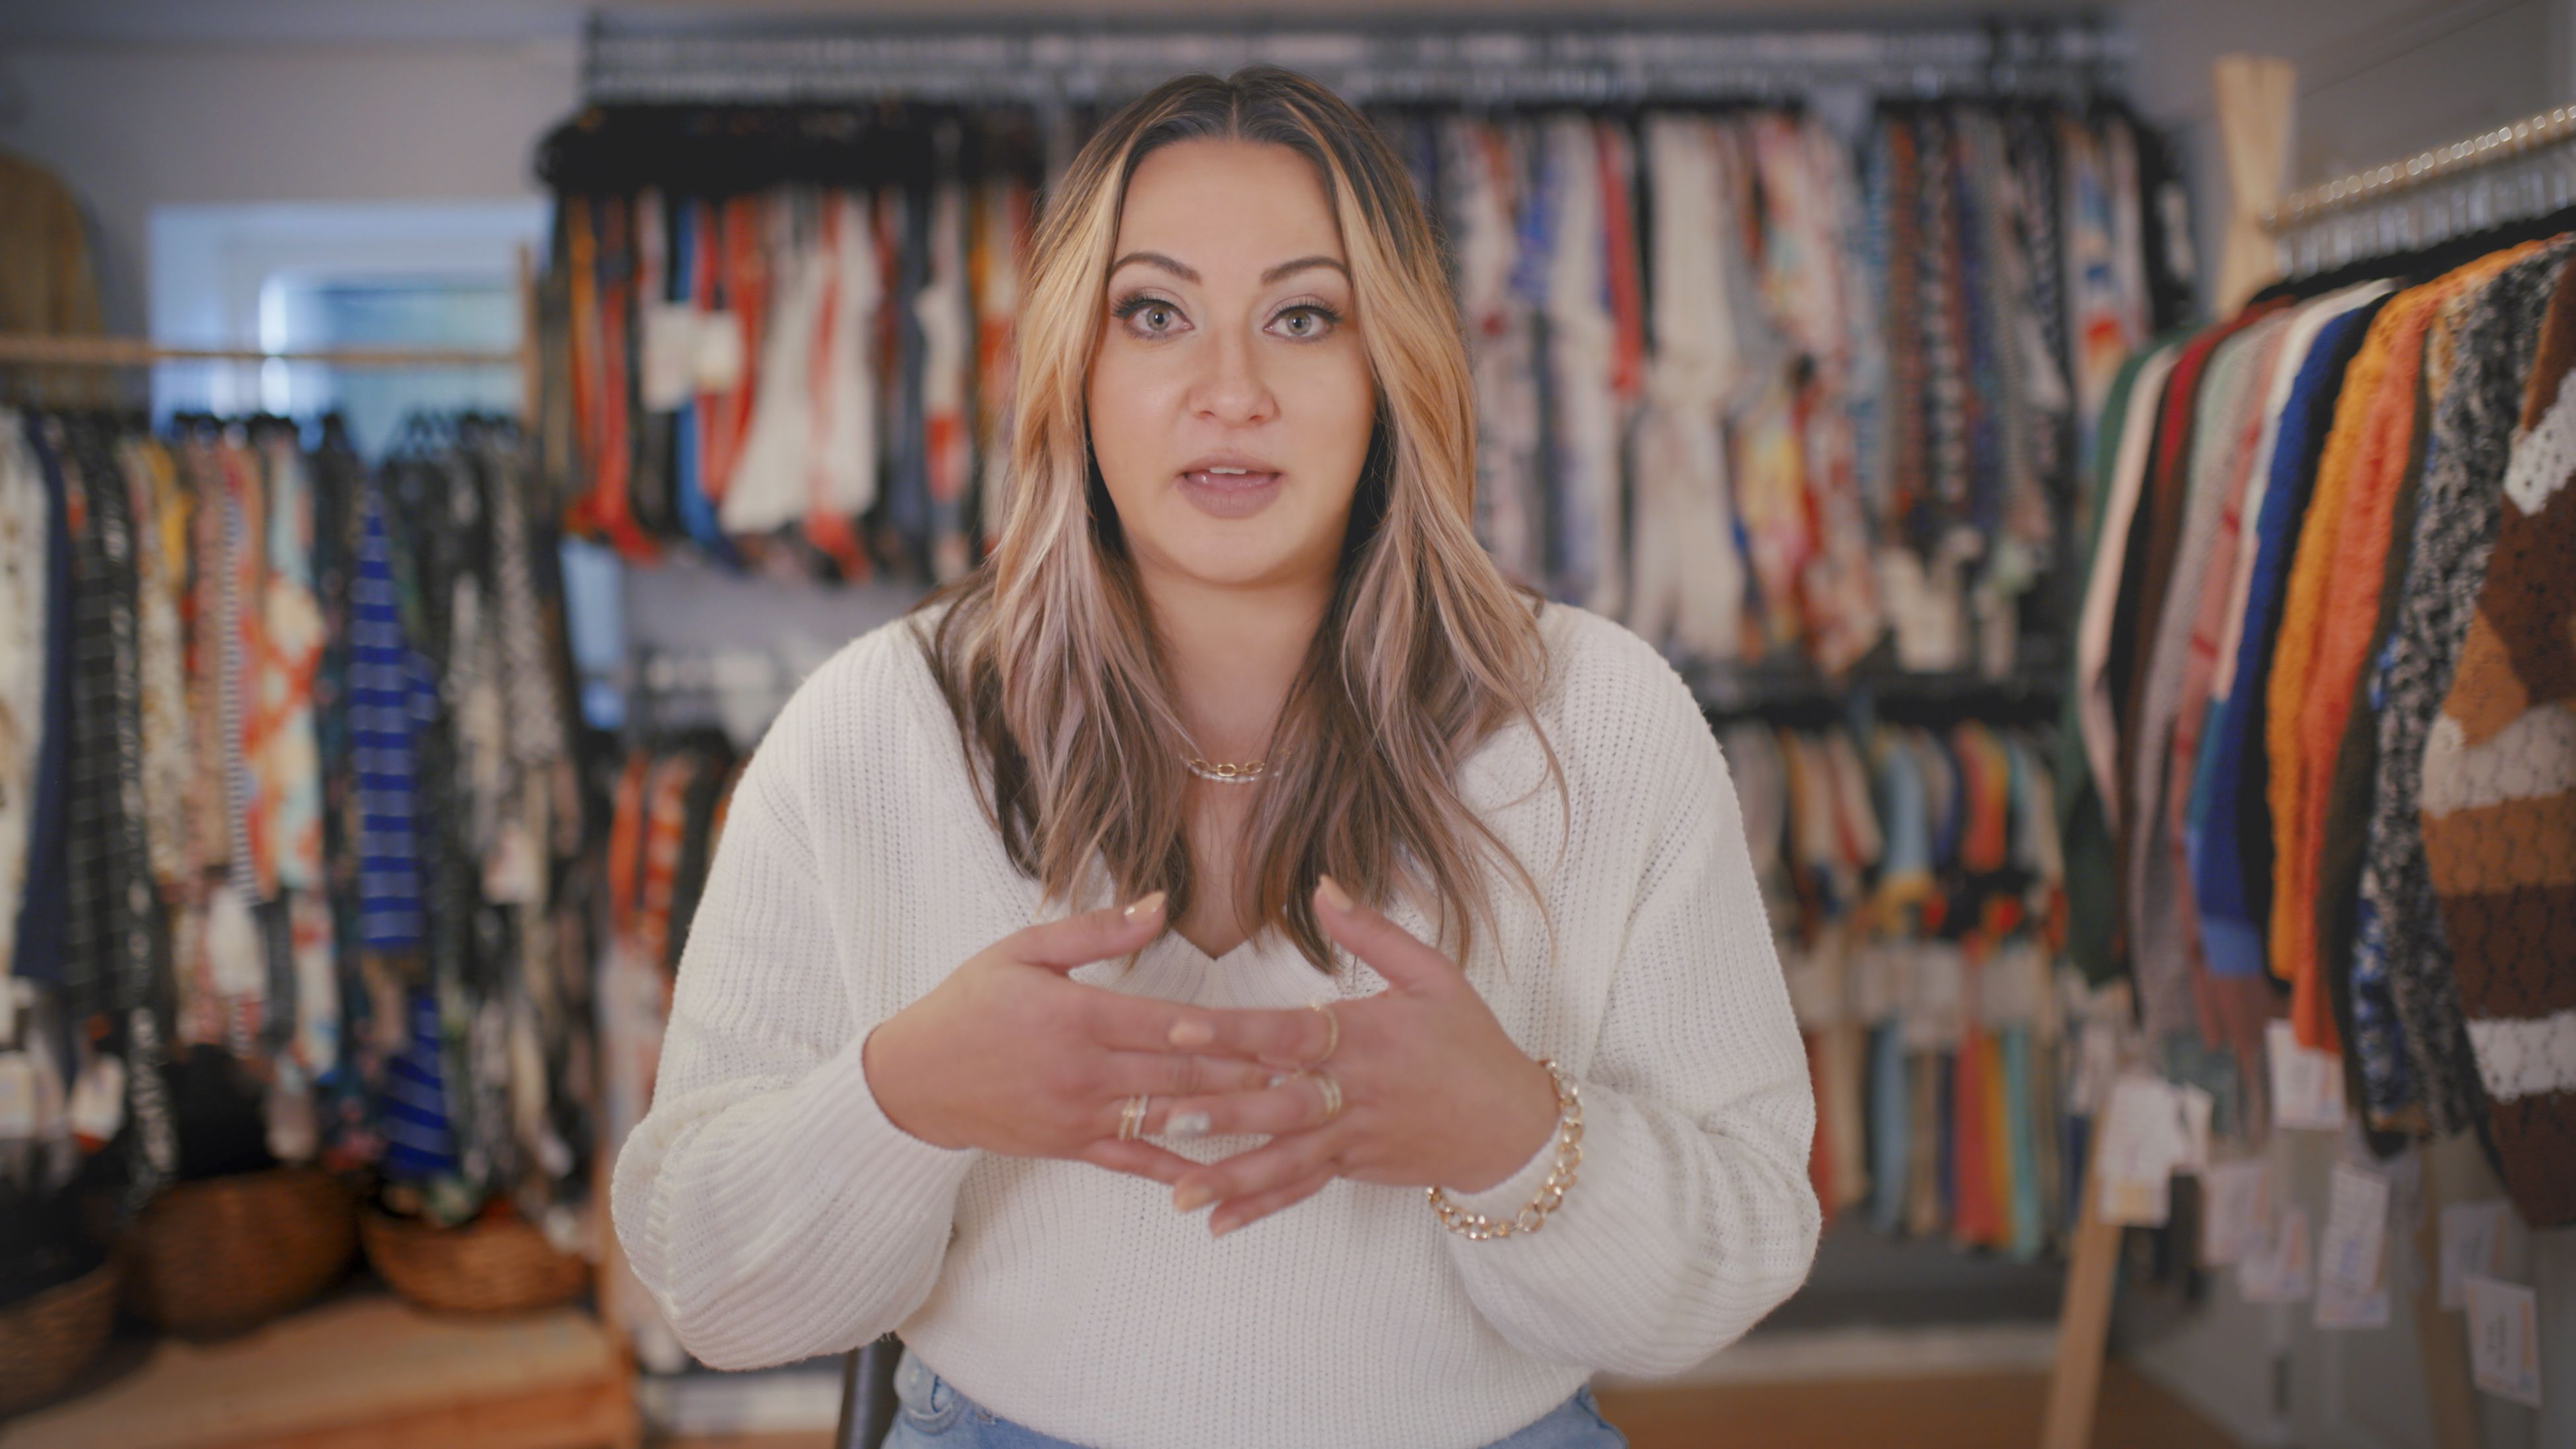 LulaRich': How Many Episodes of the LulaRoe Documentary Are There?